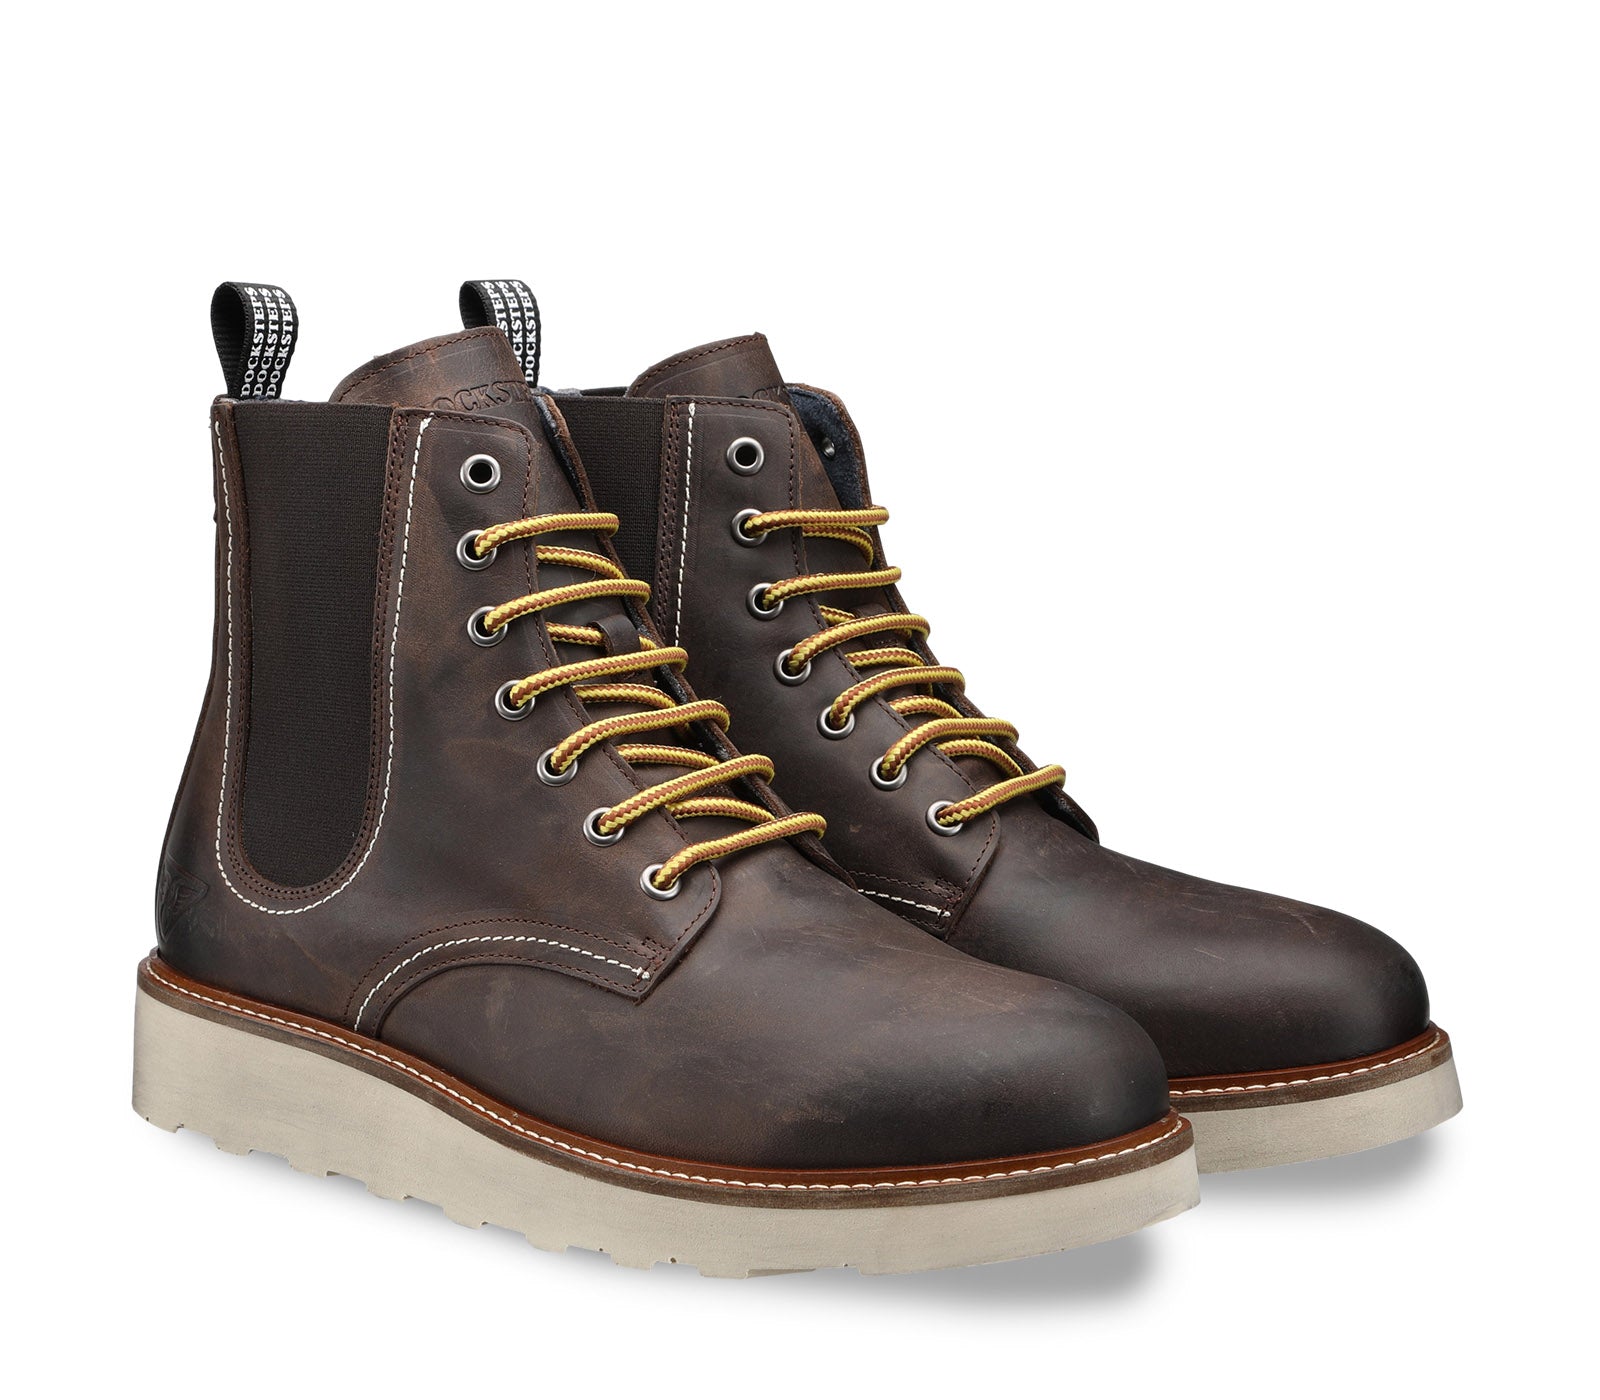 Men's Leather Boot with Laces and Side Elastics